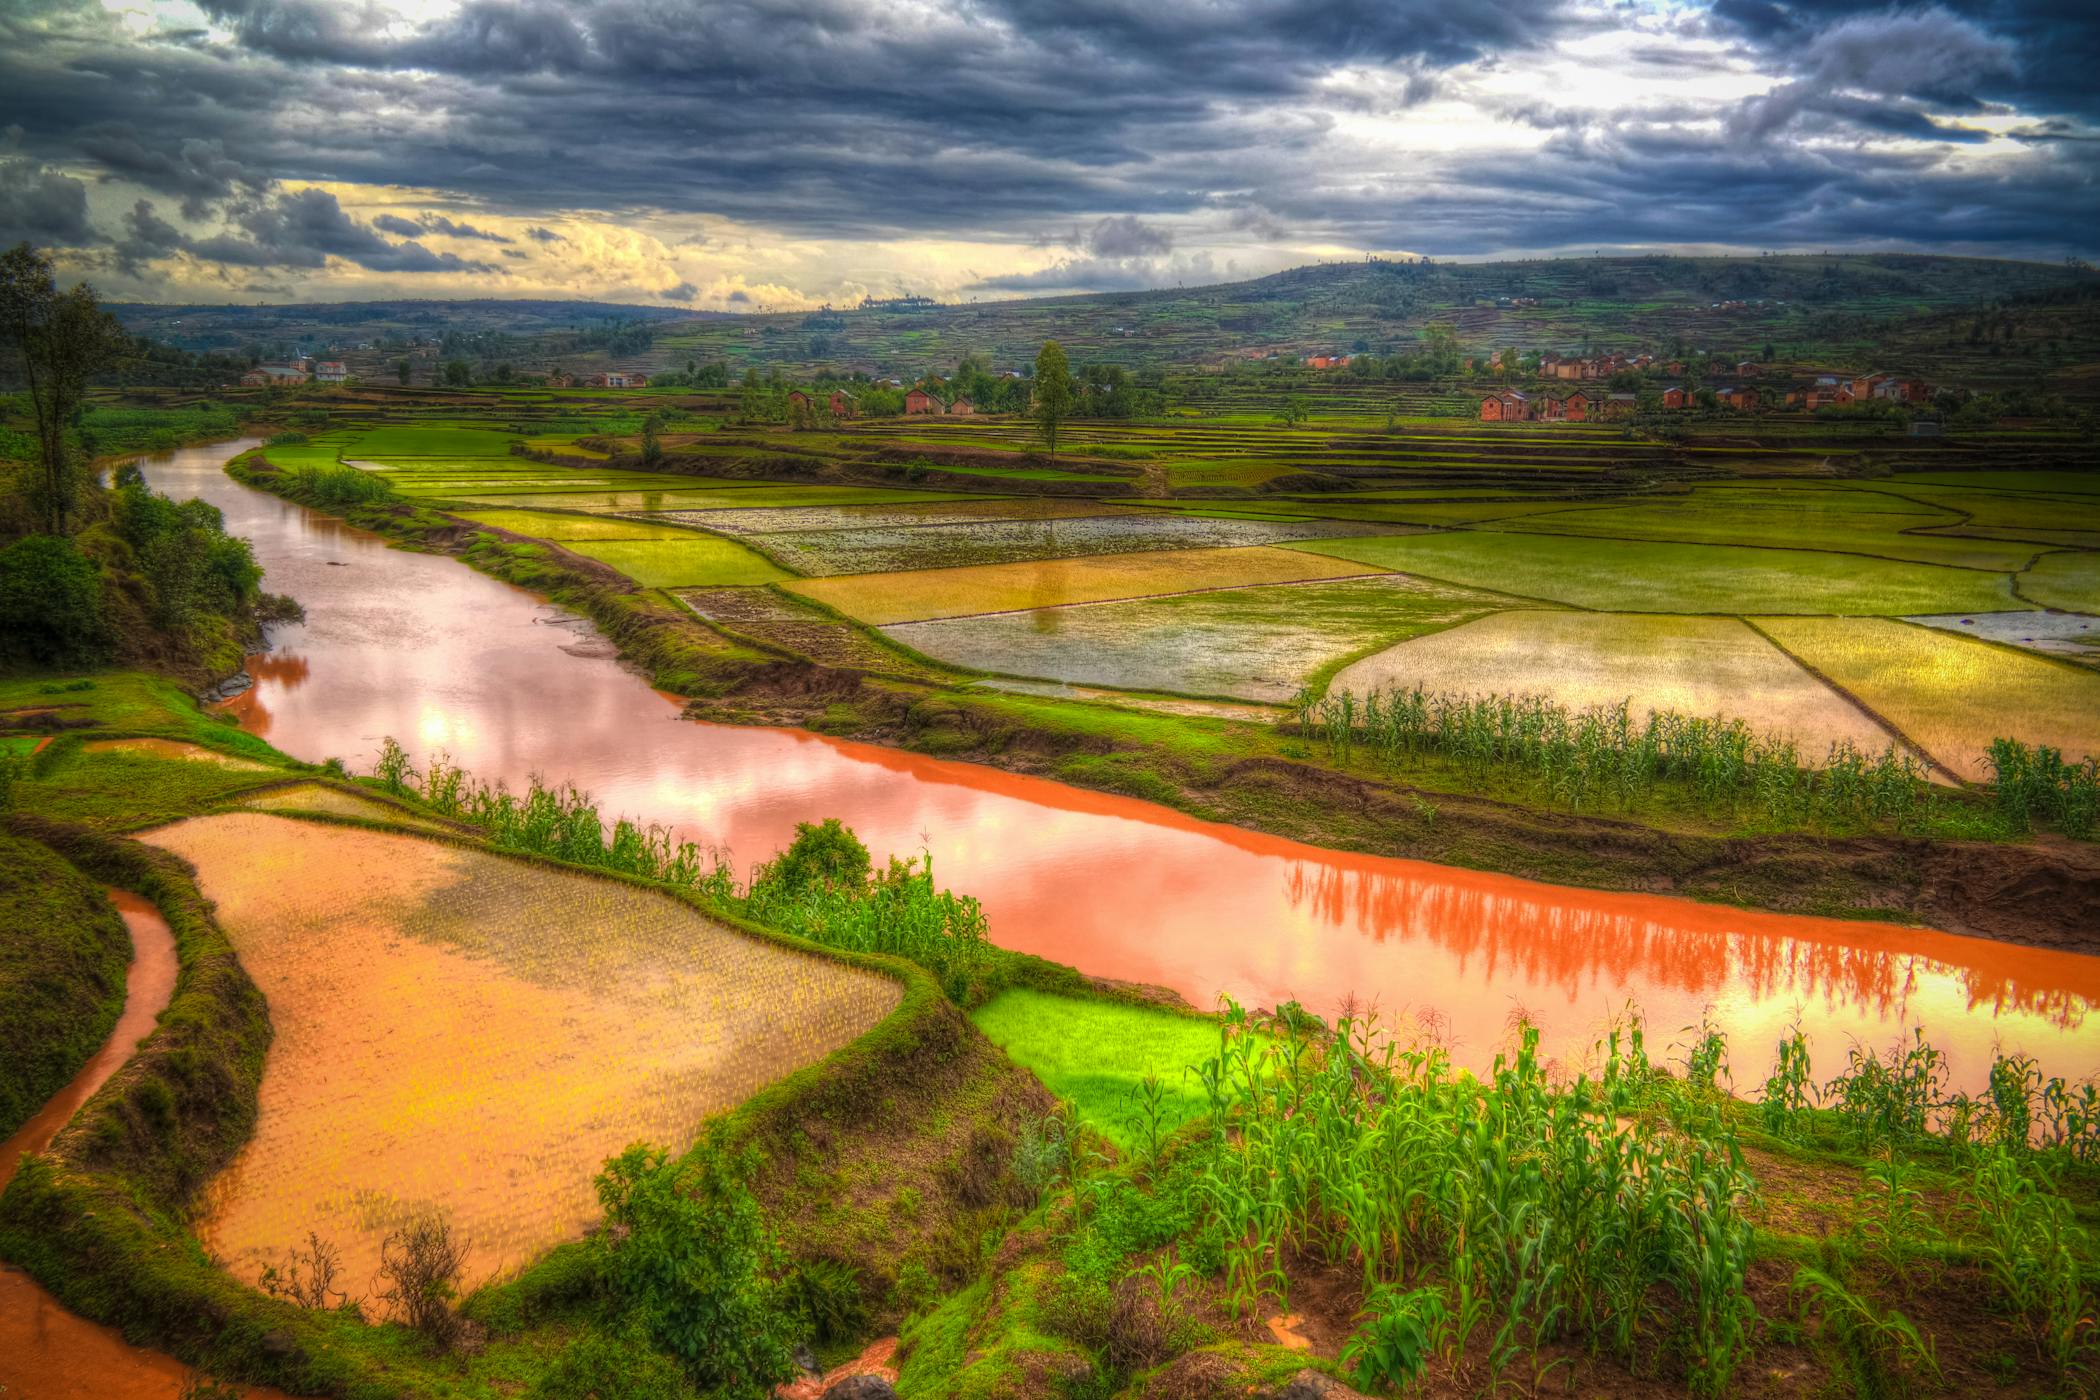 Rice fields by the Onive river in Madagascar